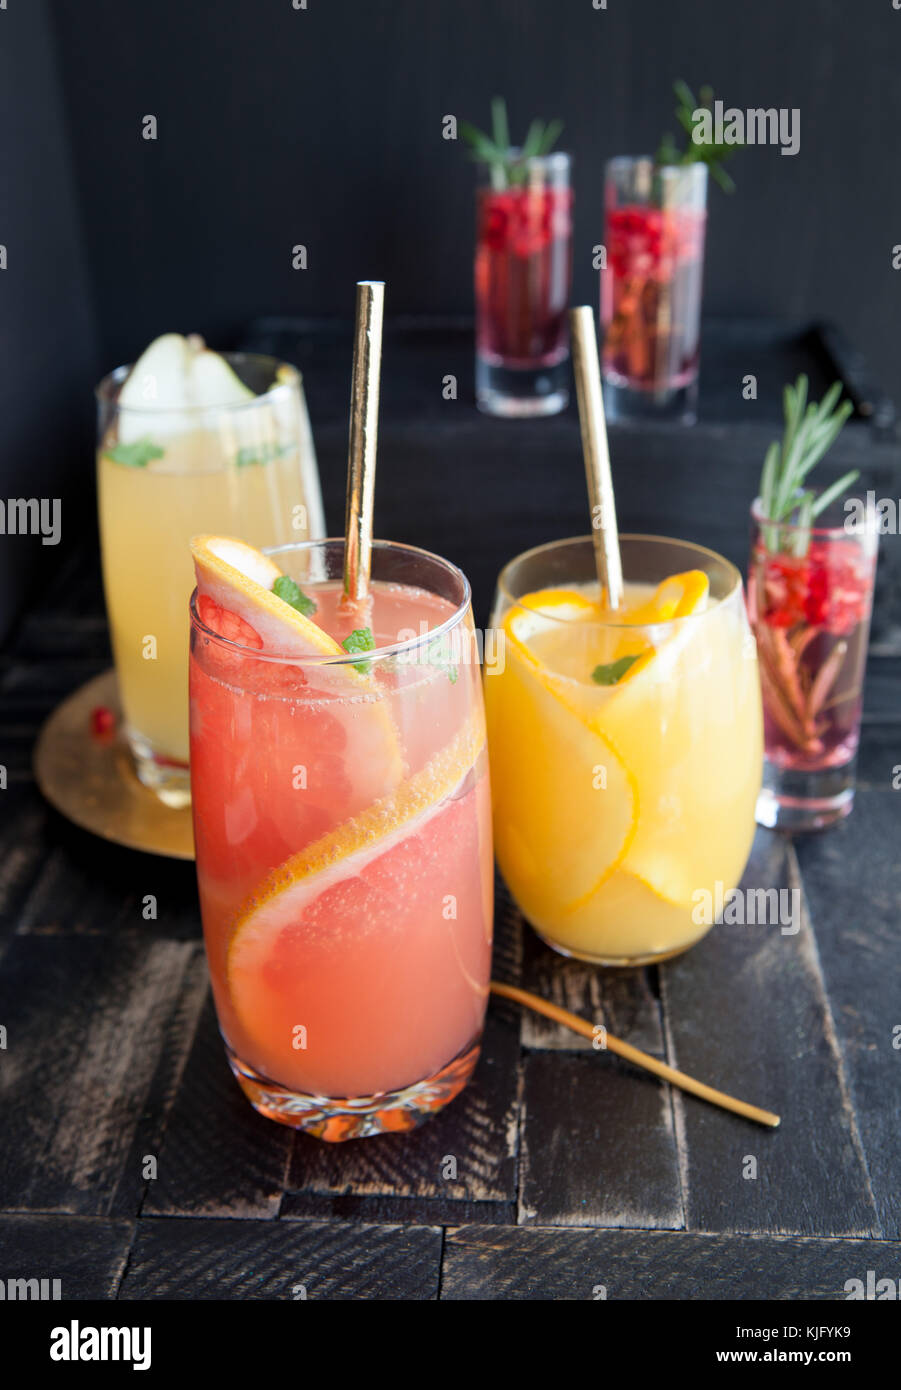 Variety of fruity cocktails on a dark background Stock Photo